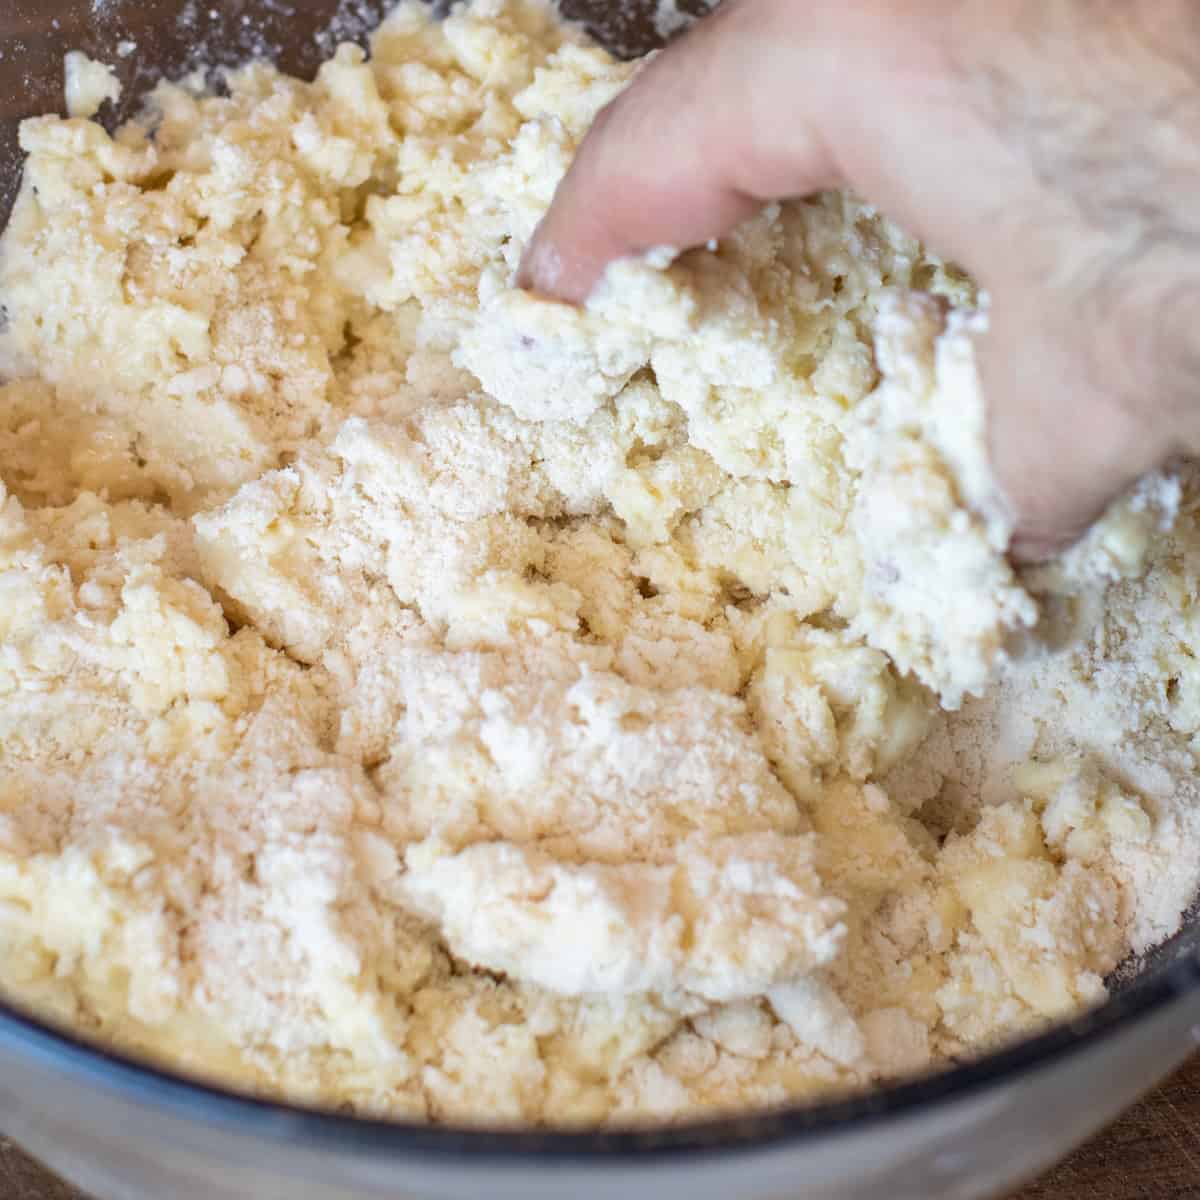 Scone dough being mixed.